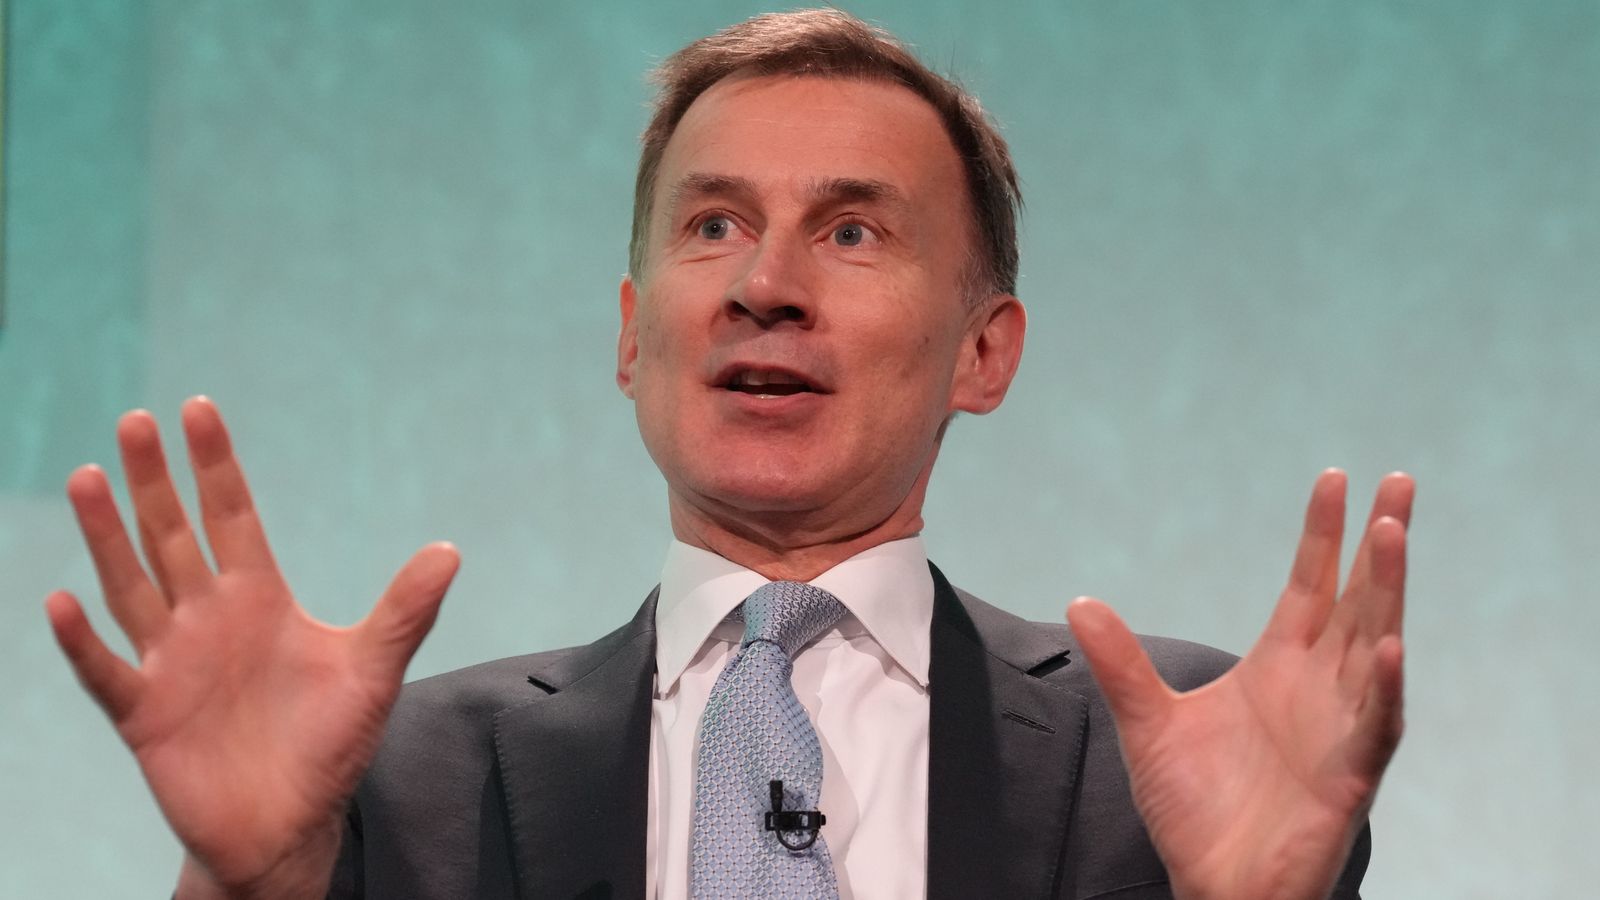 Resigning MP Chris Skidmore 'wrong' on North Sea oil and gas, Jeremy Hunt says